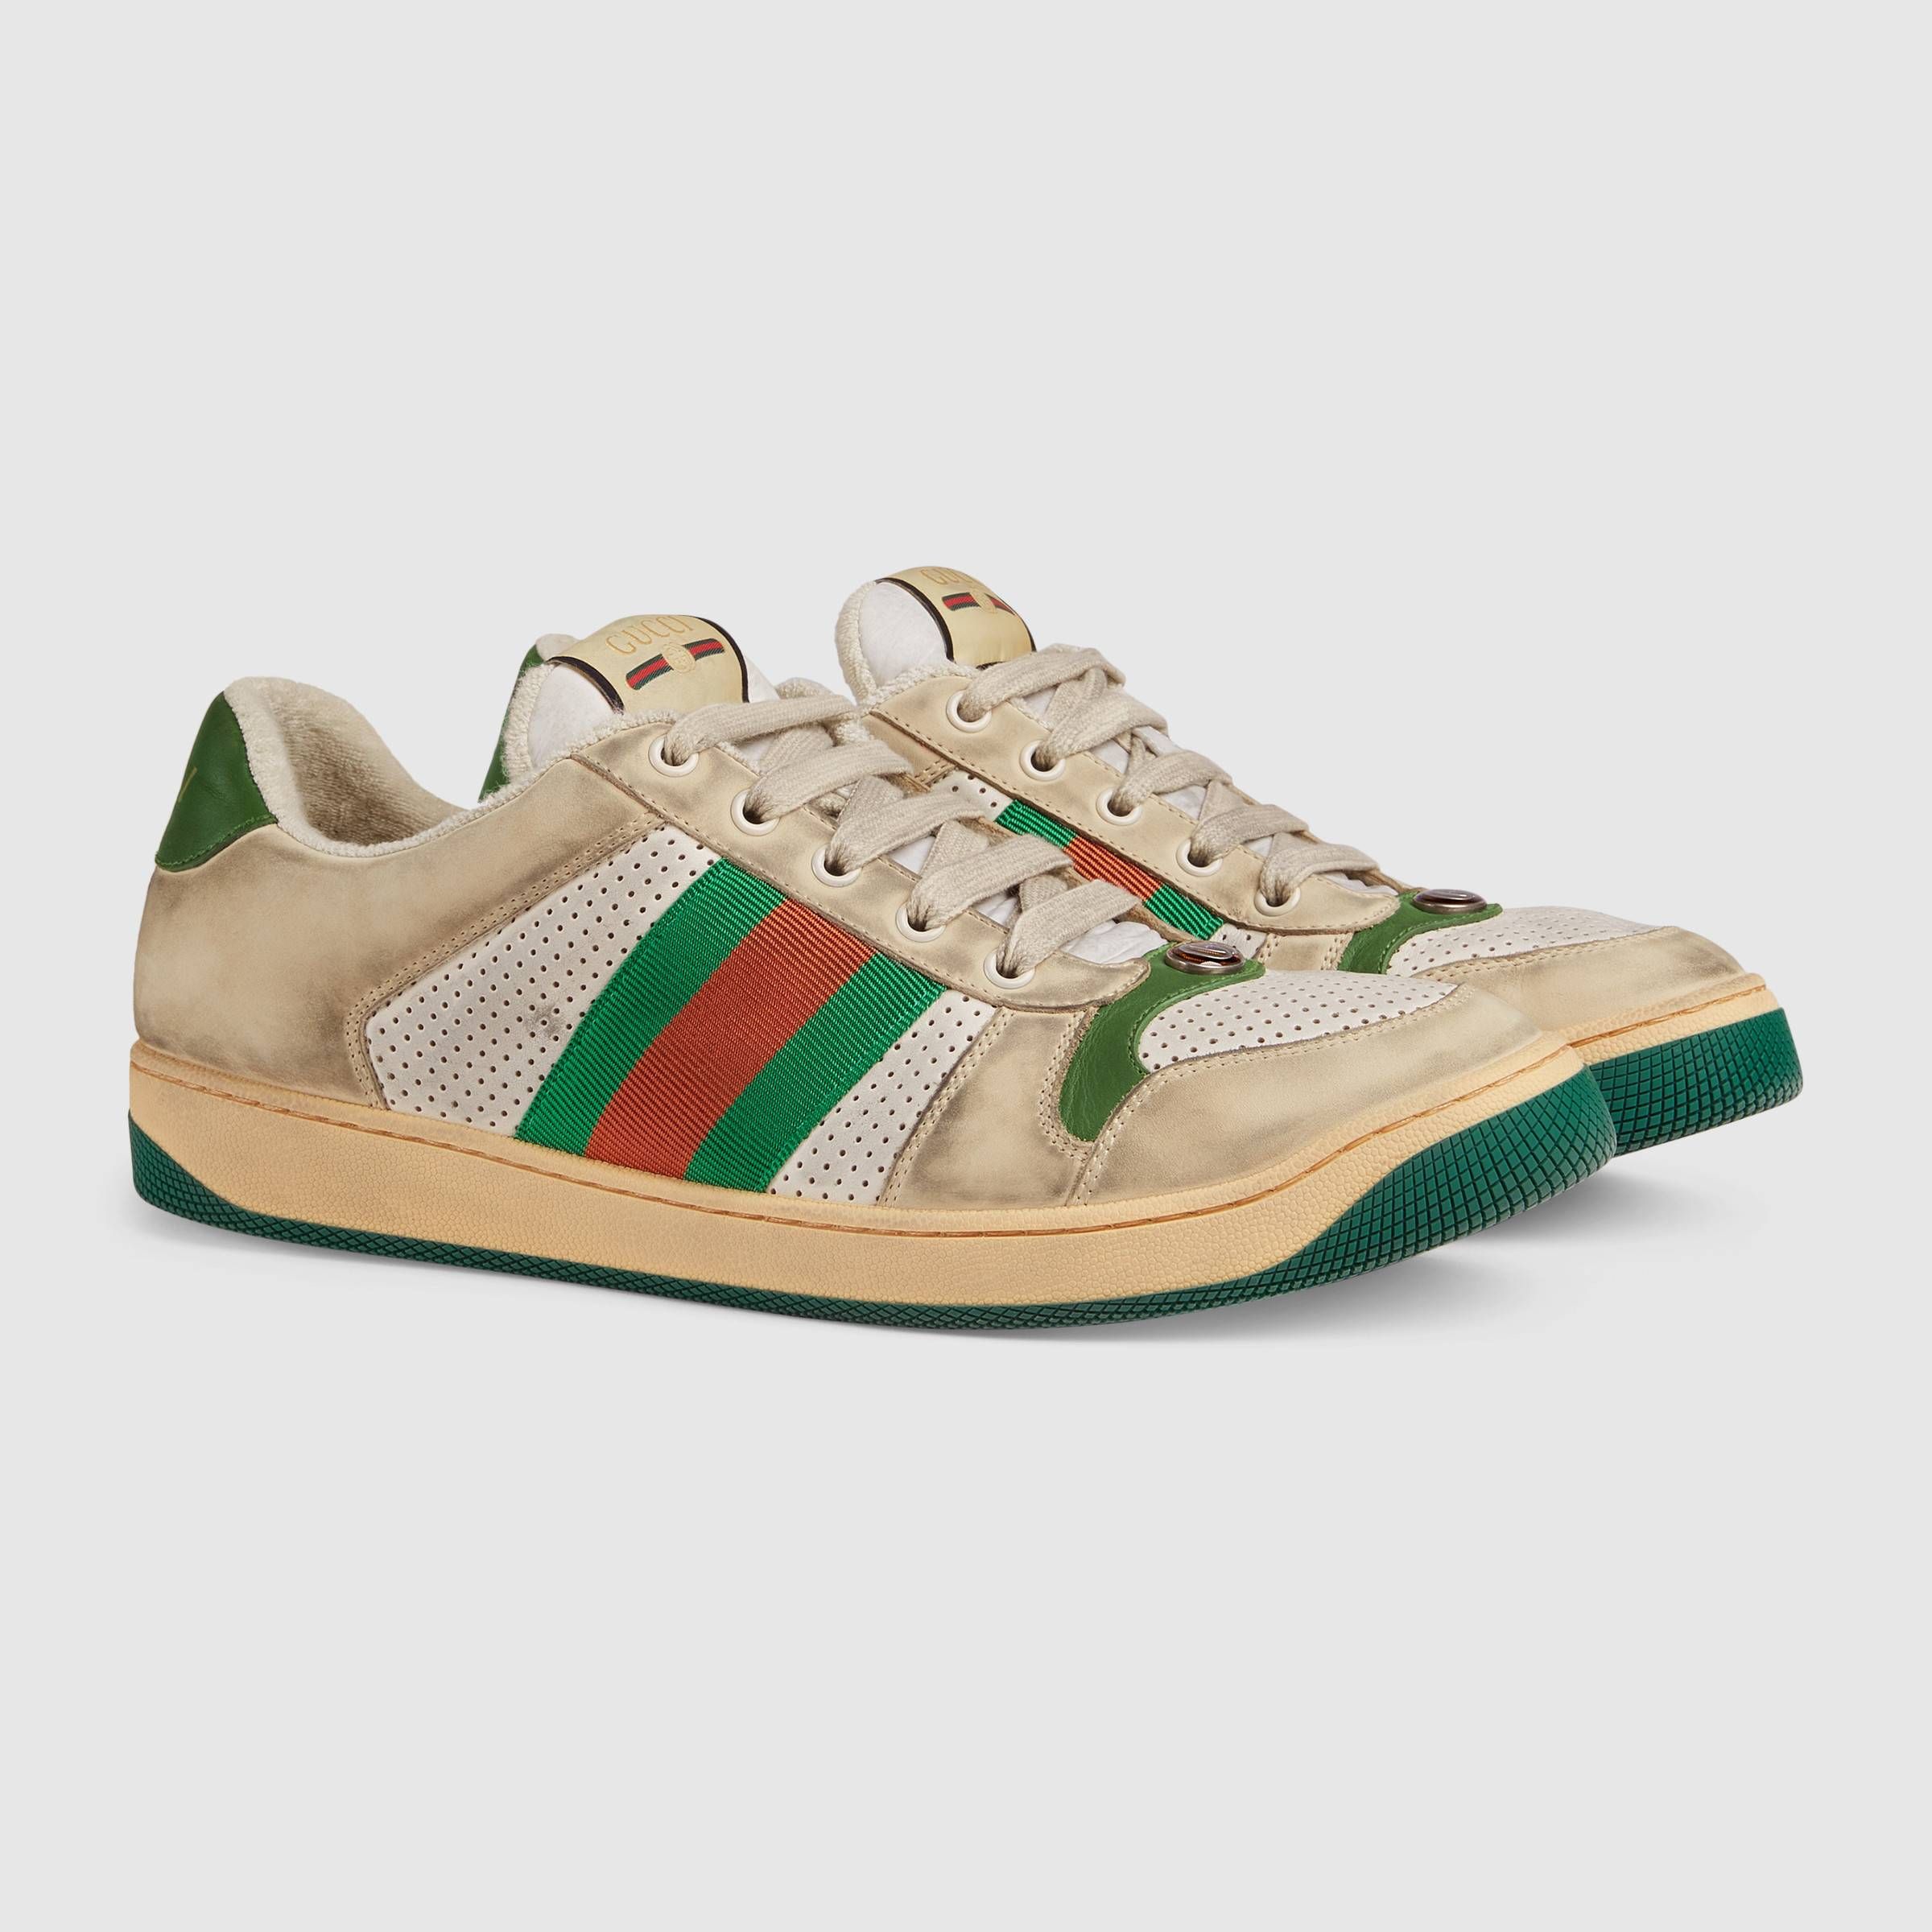 gucci latest sneakers